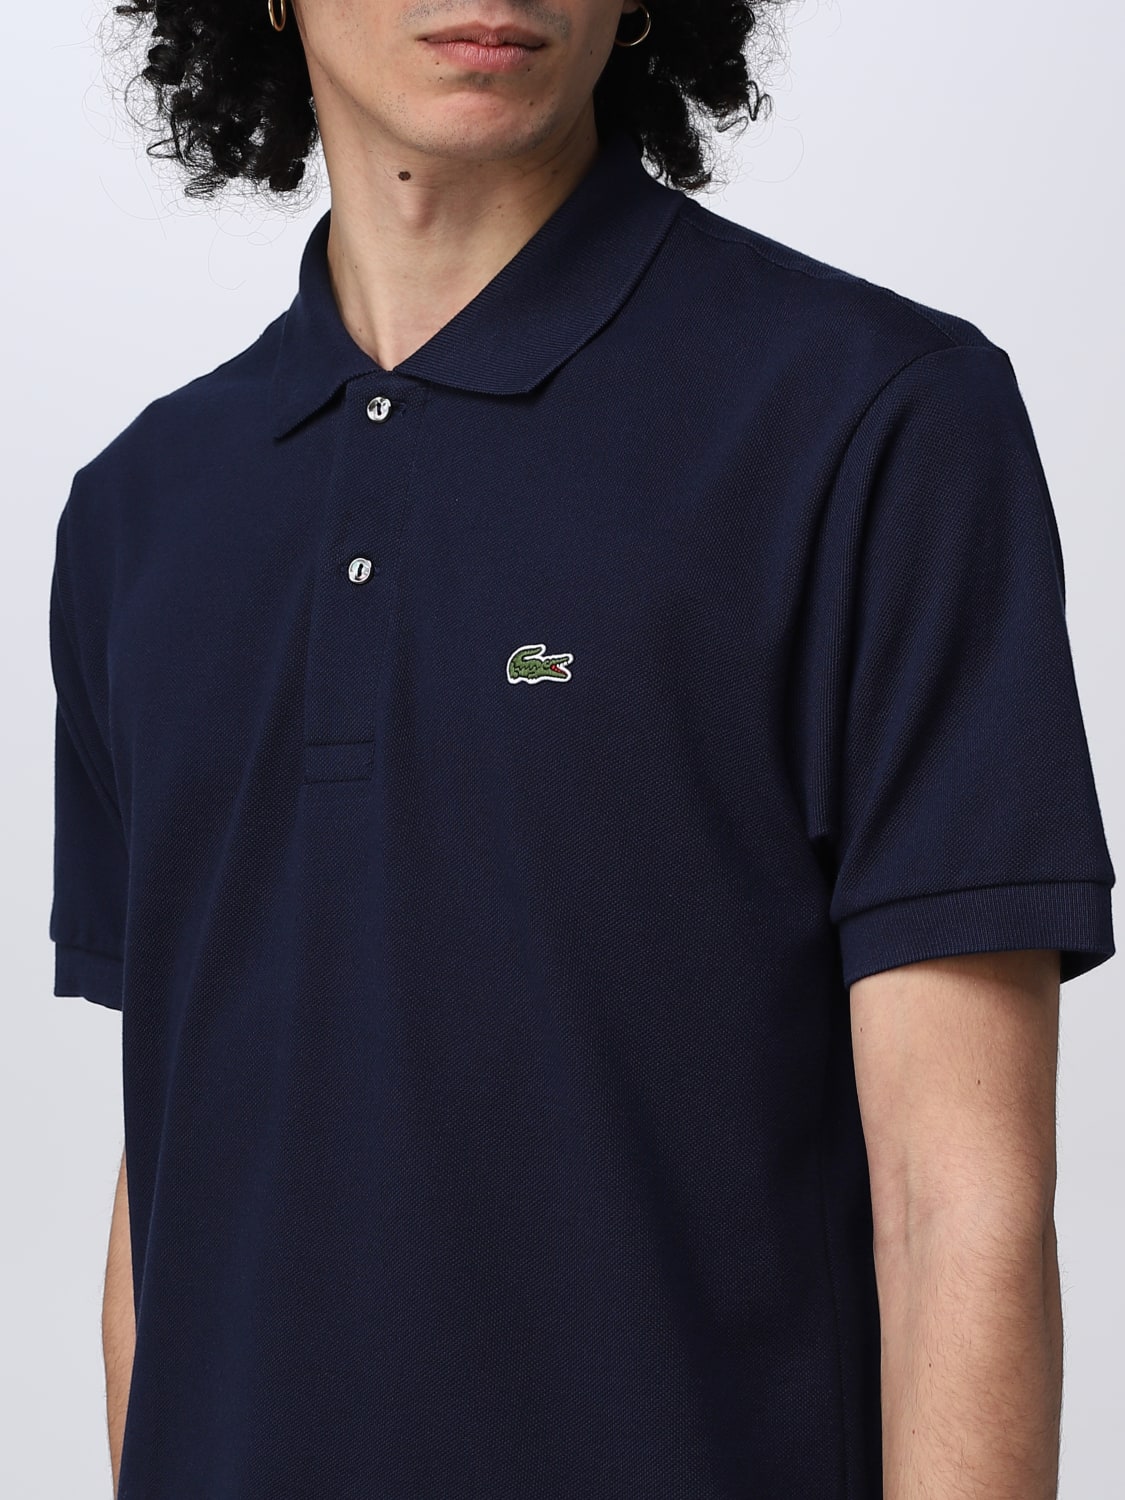 Lacoste Outlet: polo online man Lacoste L1212 - for shirt | at shirt Navy polo